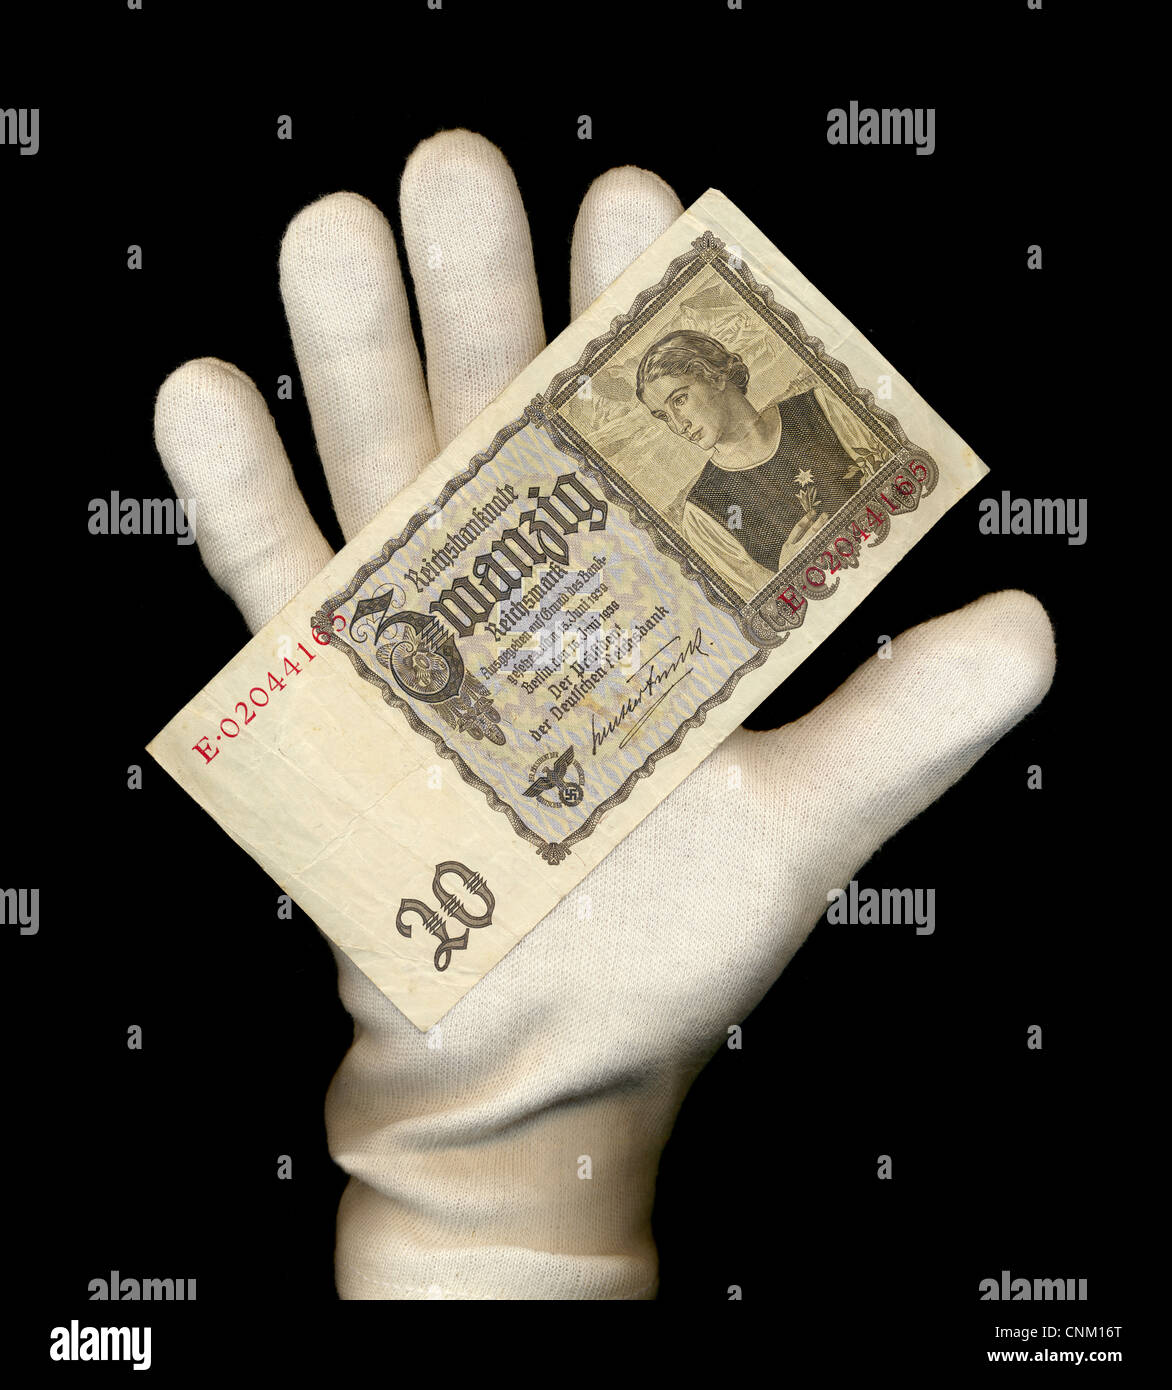 A hand with a white glove holds a banknote, Reichsbank, value 20 Reichmarks, 1939, Germany, Europe Stock Photo